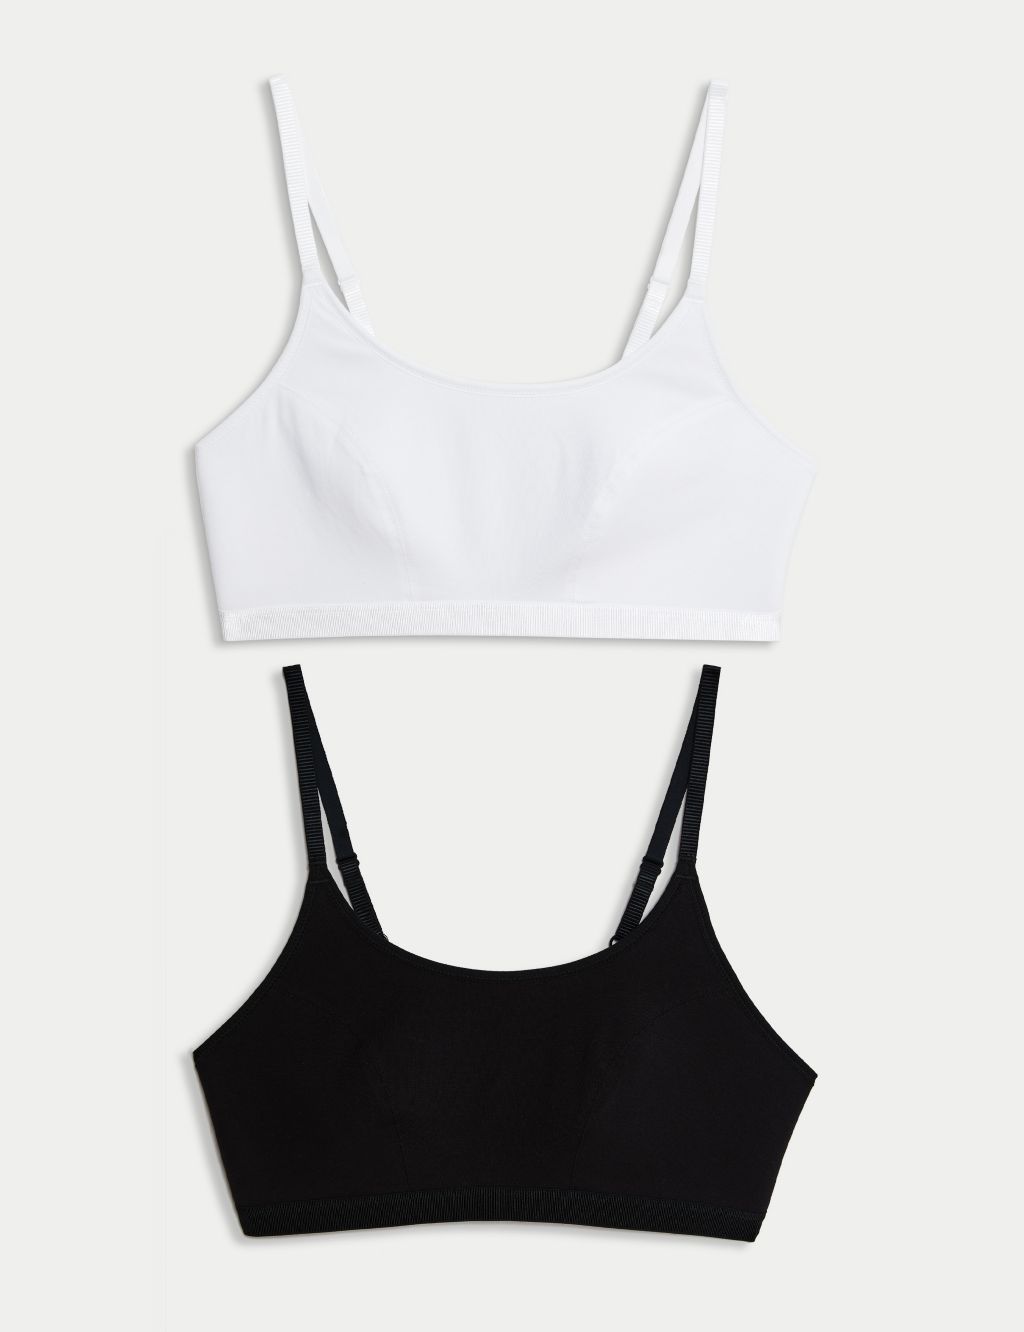 Buy Girls' First Bras from the M&S UK Online Shop